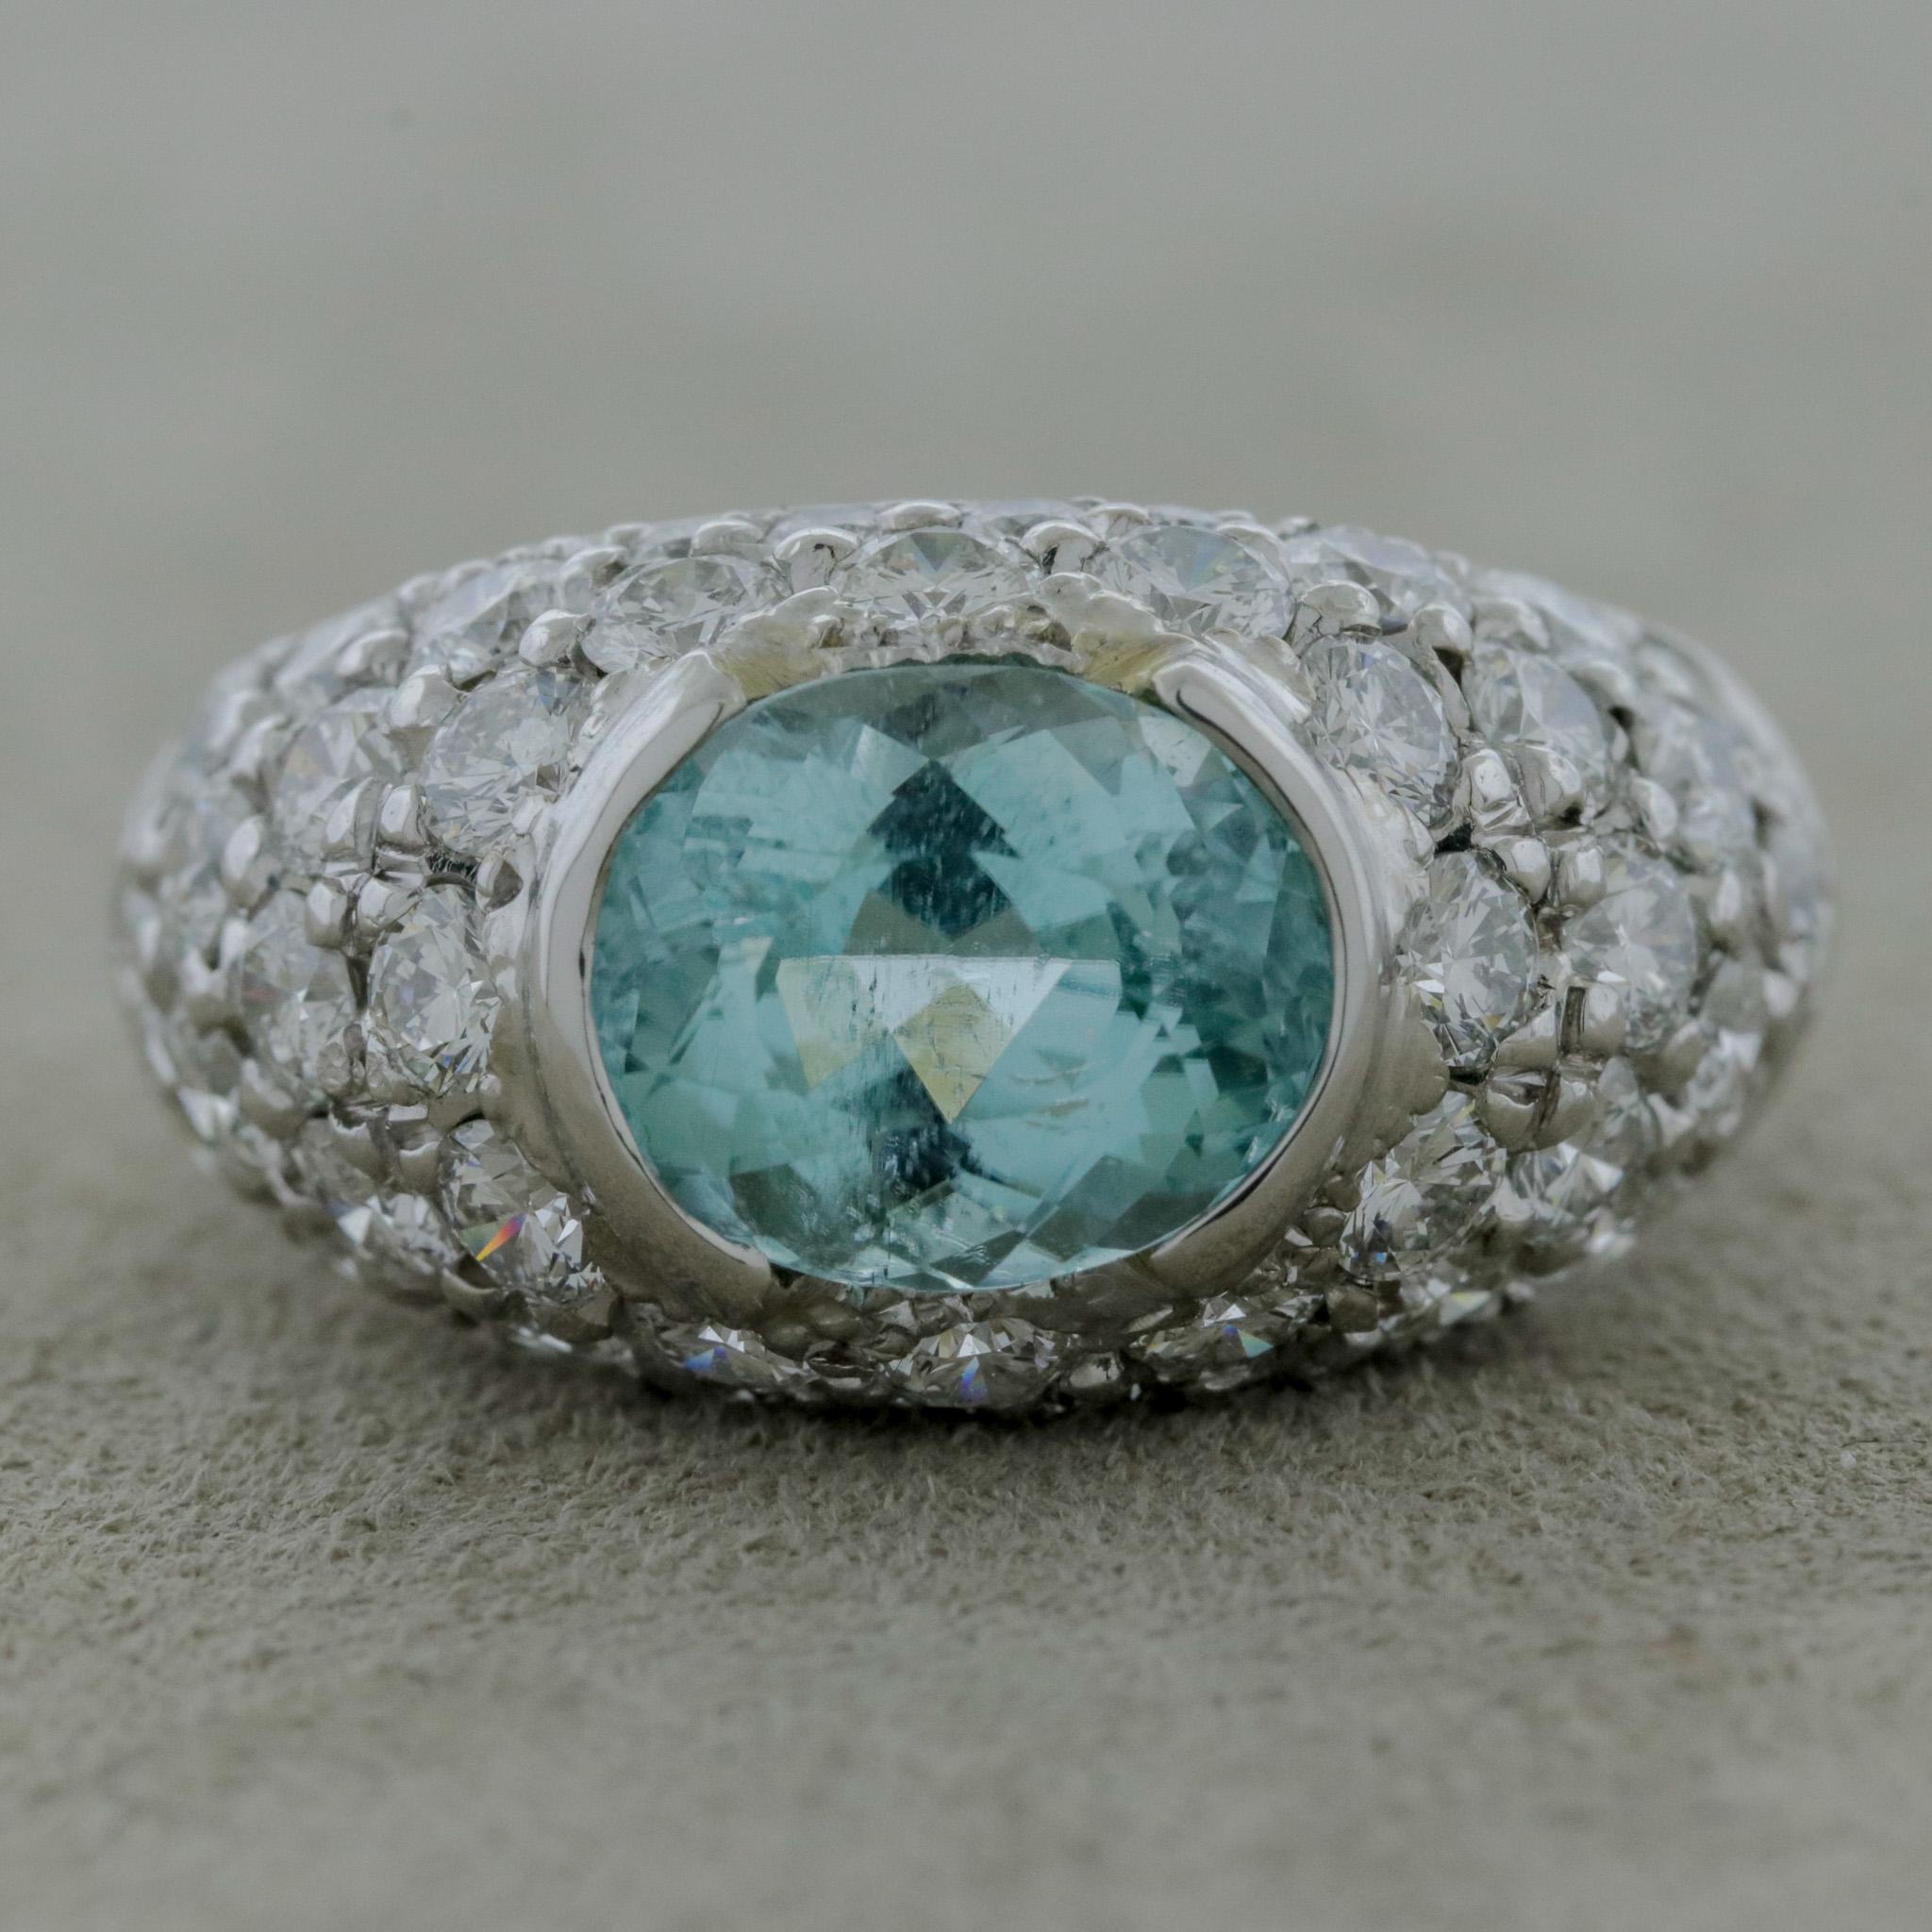 A lovely ring with a fine and rare gemstone. It is an oval-shaped Paraiba tourmaline weighing 2.53 carats. It has an electric greenish-blue color which Paraiba is known for and is certified by the GIA as natural. It is accented by 3.11 carats of